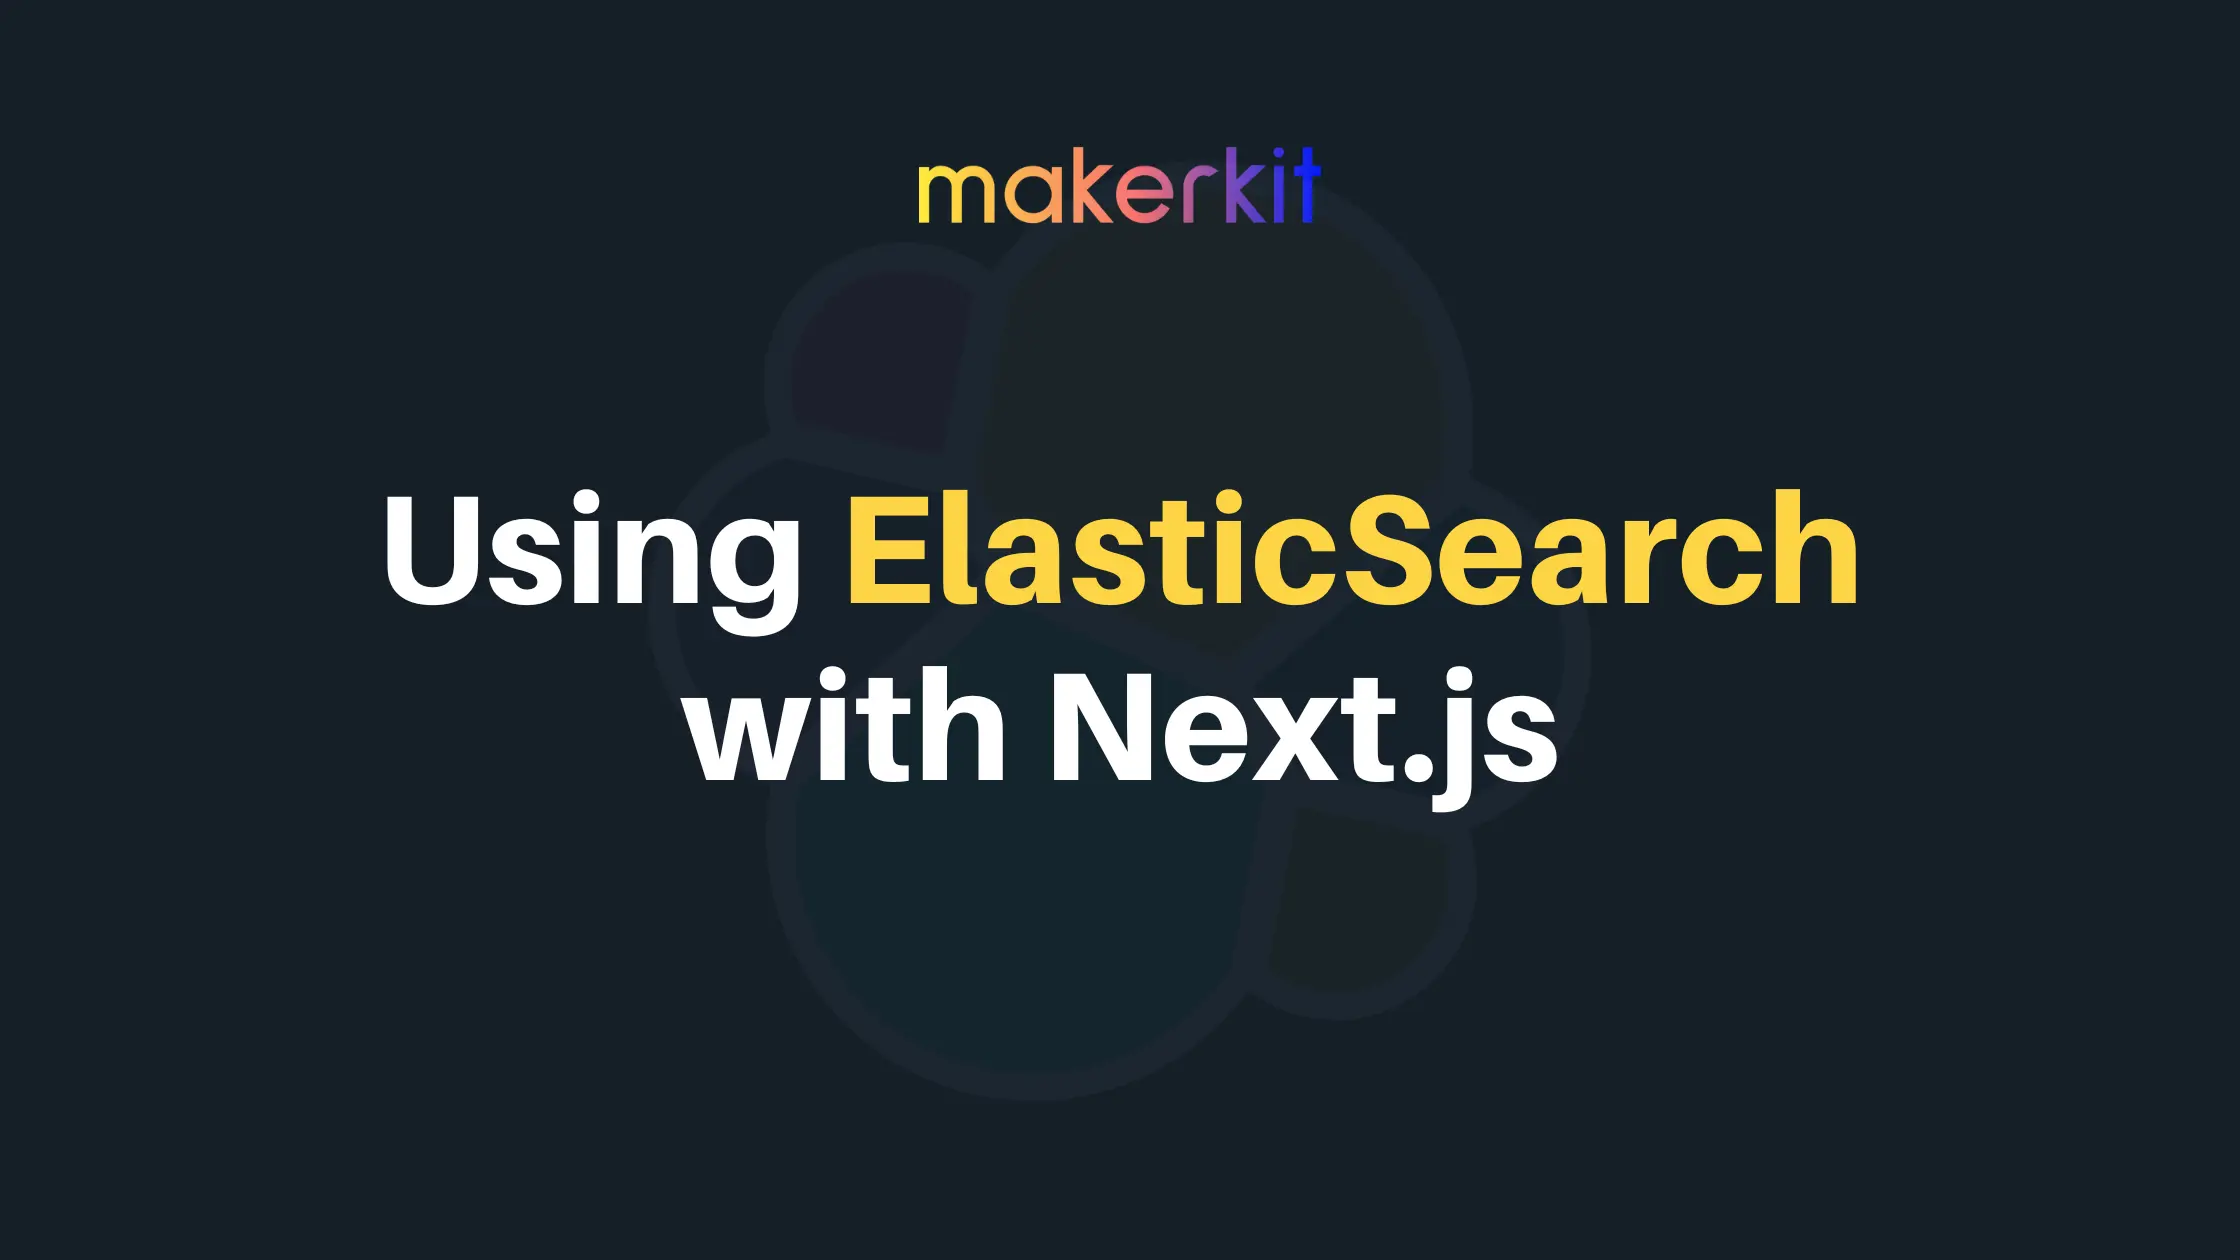 Cover Image for Using ElasticSearch with Next.js